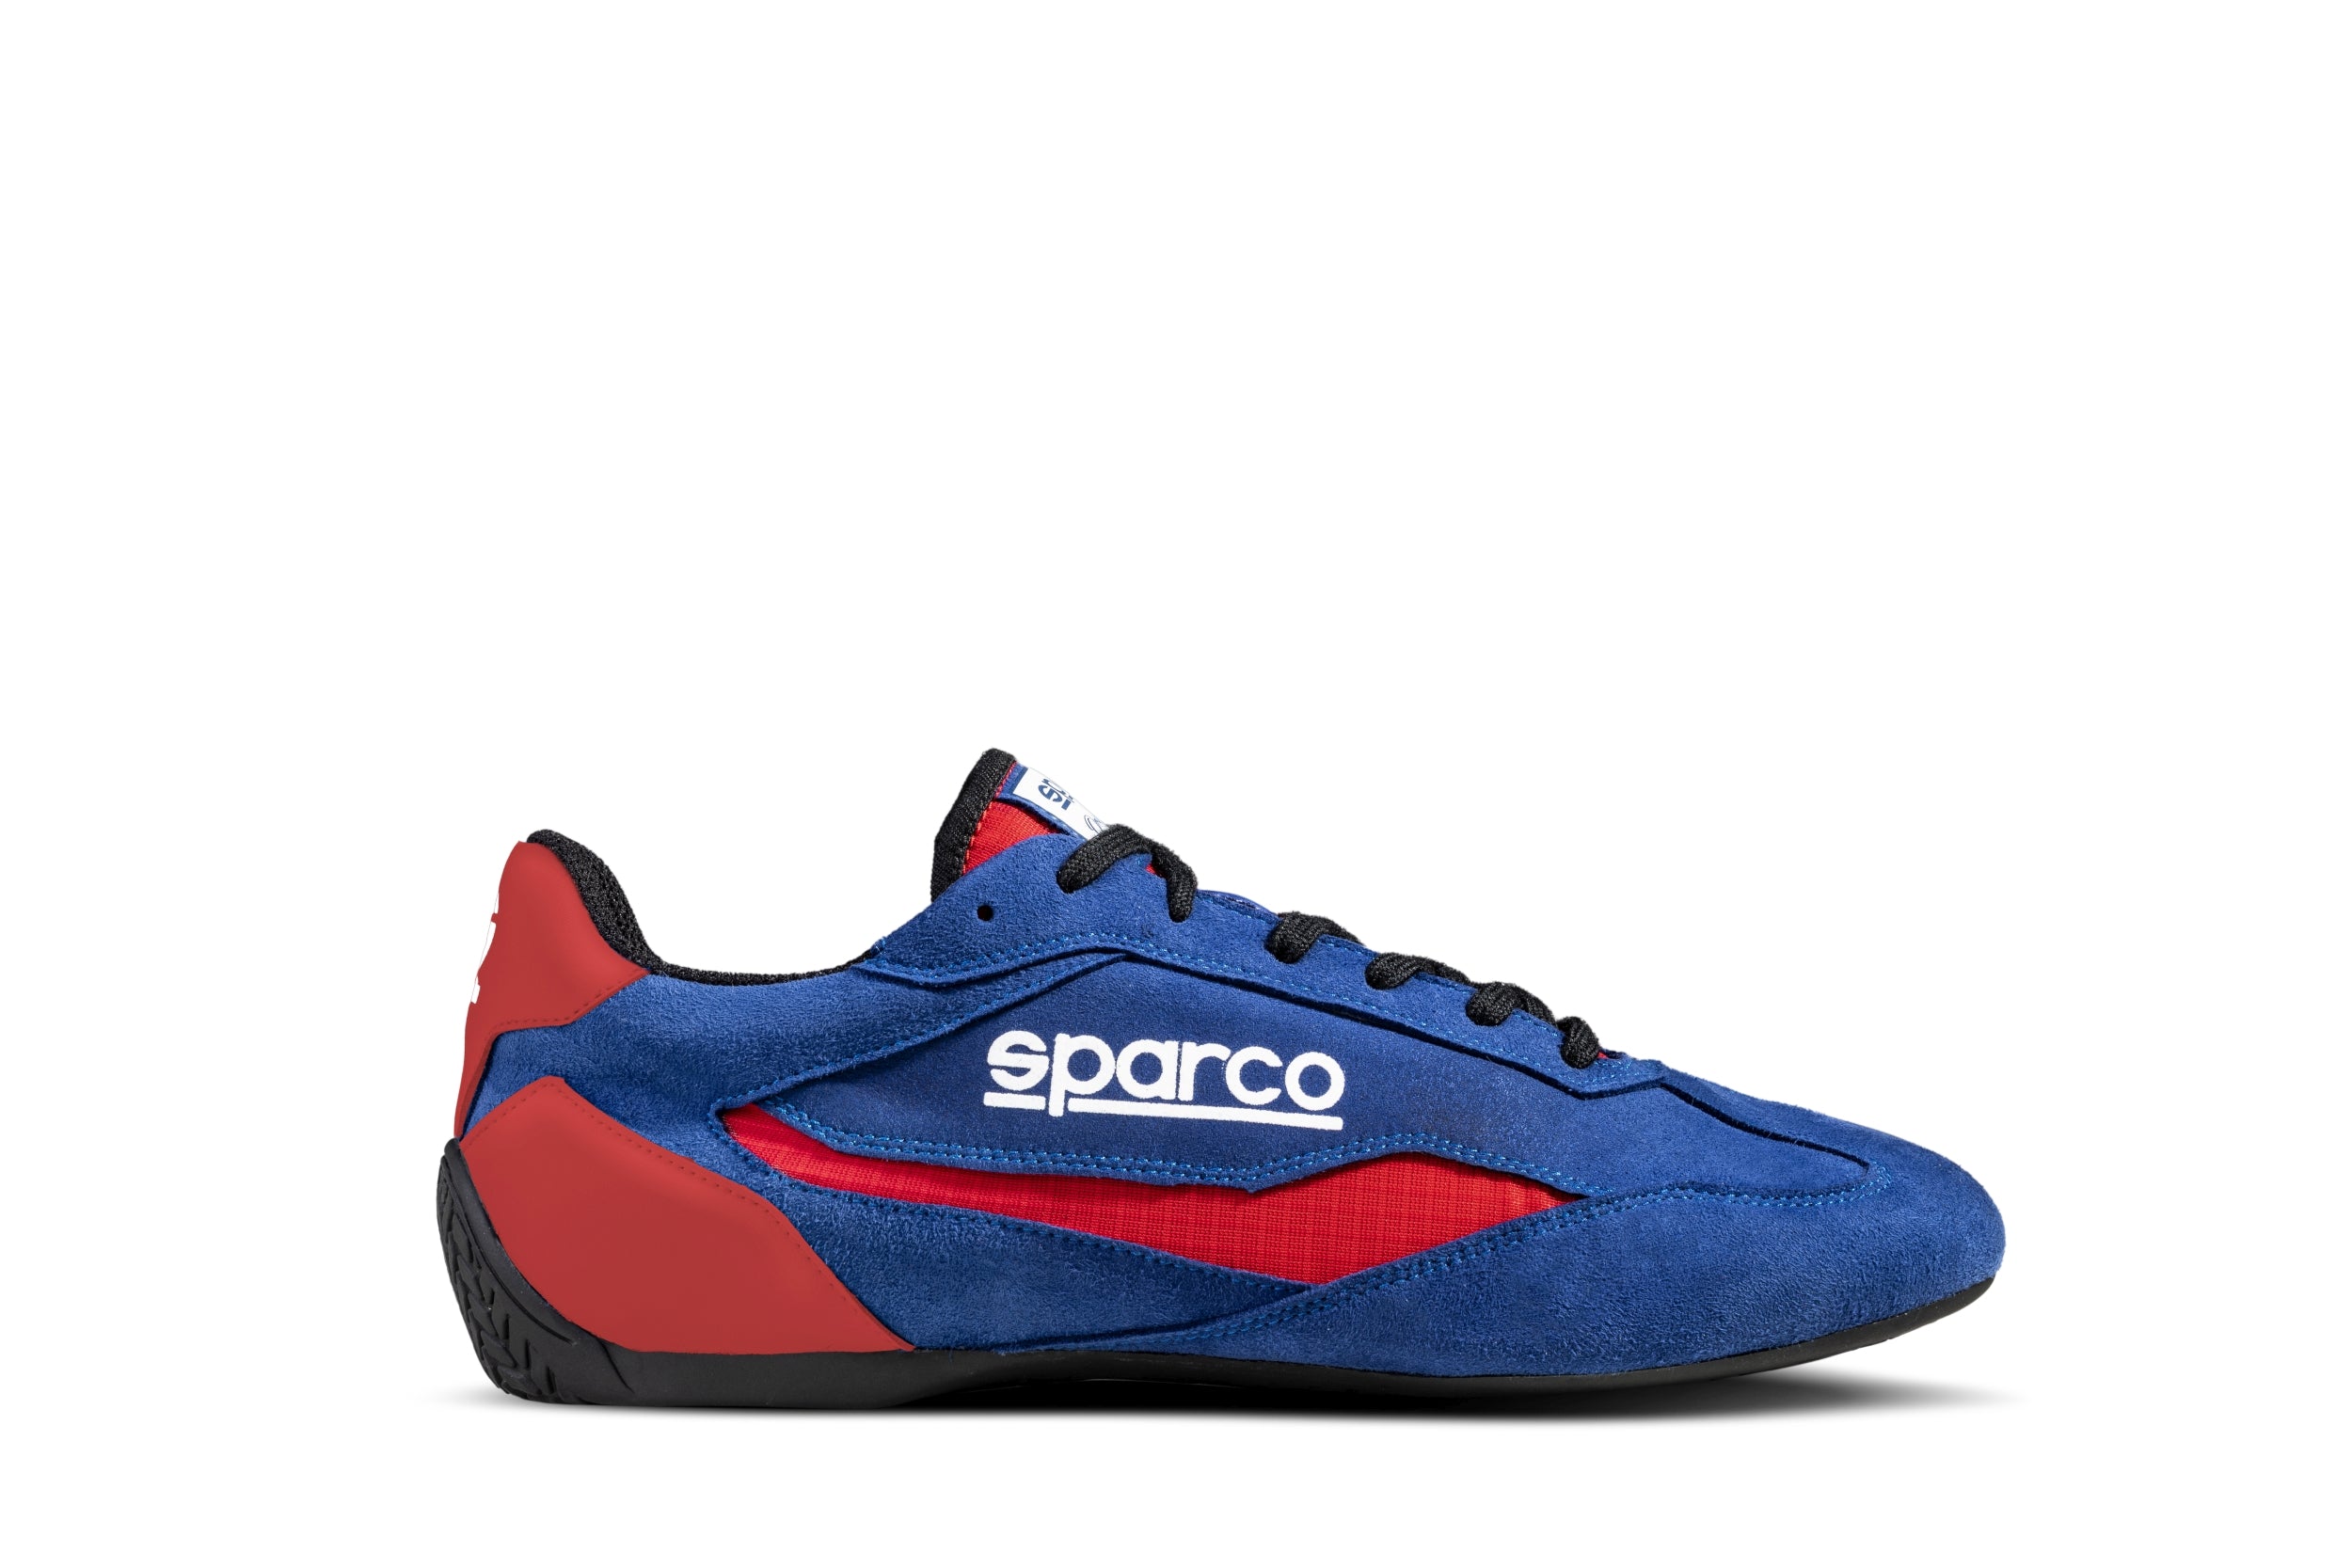 SPARCO 0012A743BMRS S-DRIVE Shoes, navy blue/red, size 43 Photo-2 